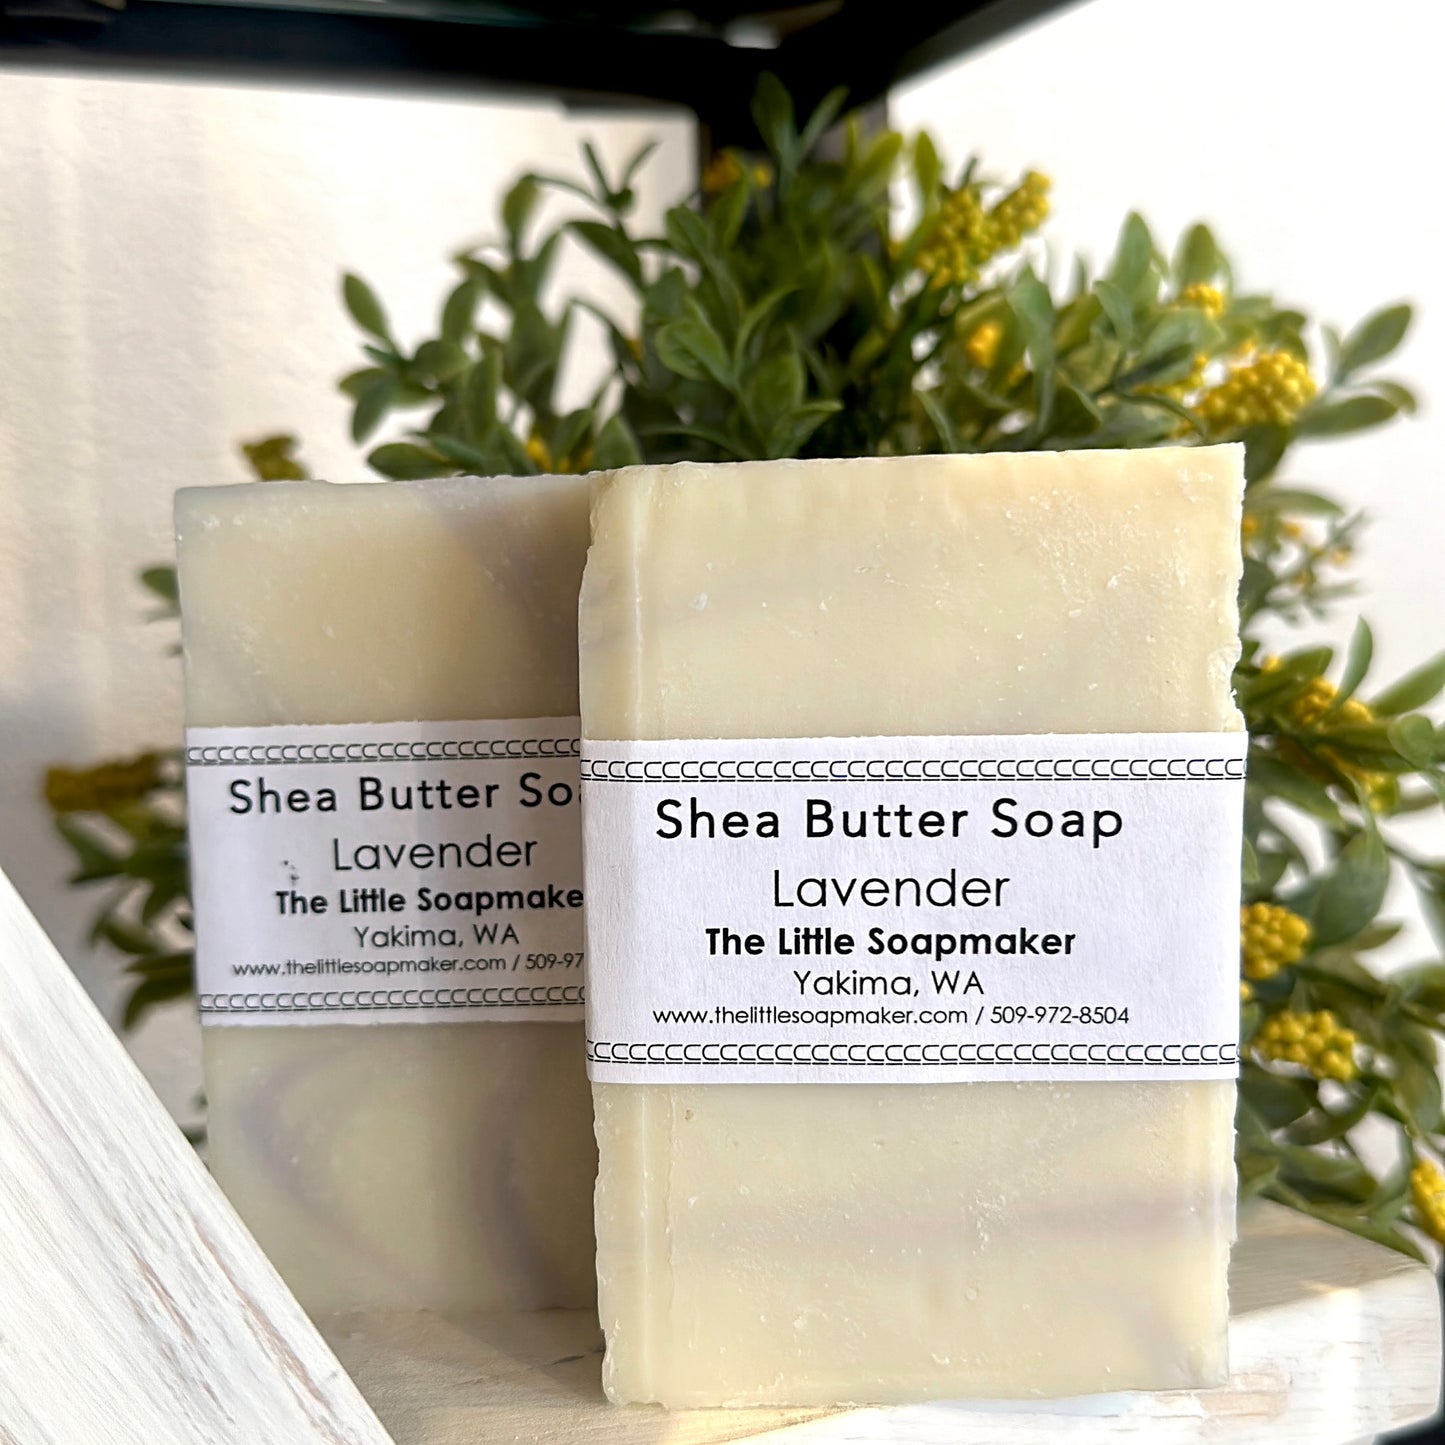 Shea Butter Soaps – The Little Soapmaker